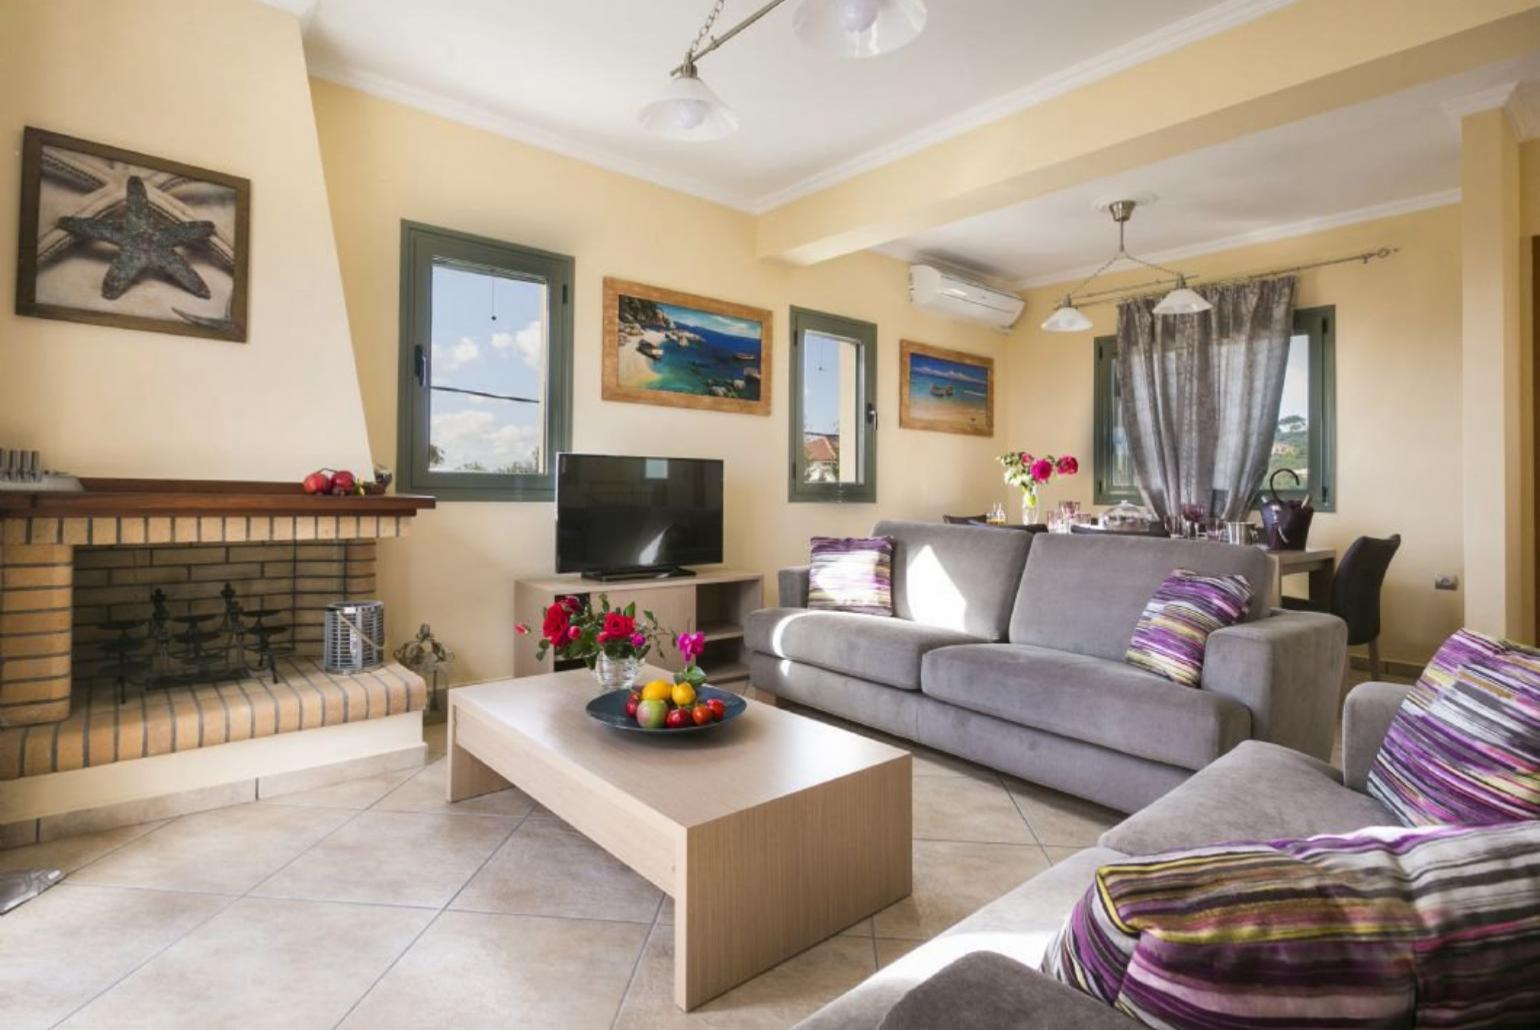 Open-plan living room with sofas, dining area, kitchen, ornamental fireplace, A/C, WiFi internet, satellite TV, DVD player, and sea views